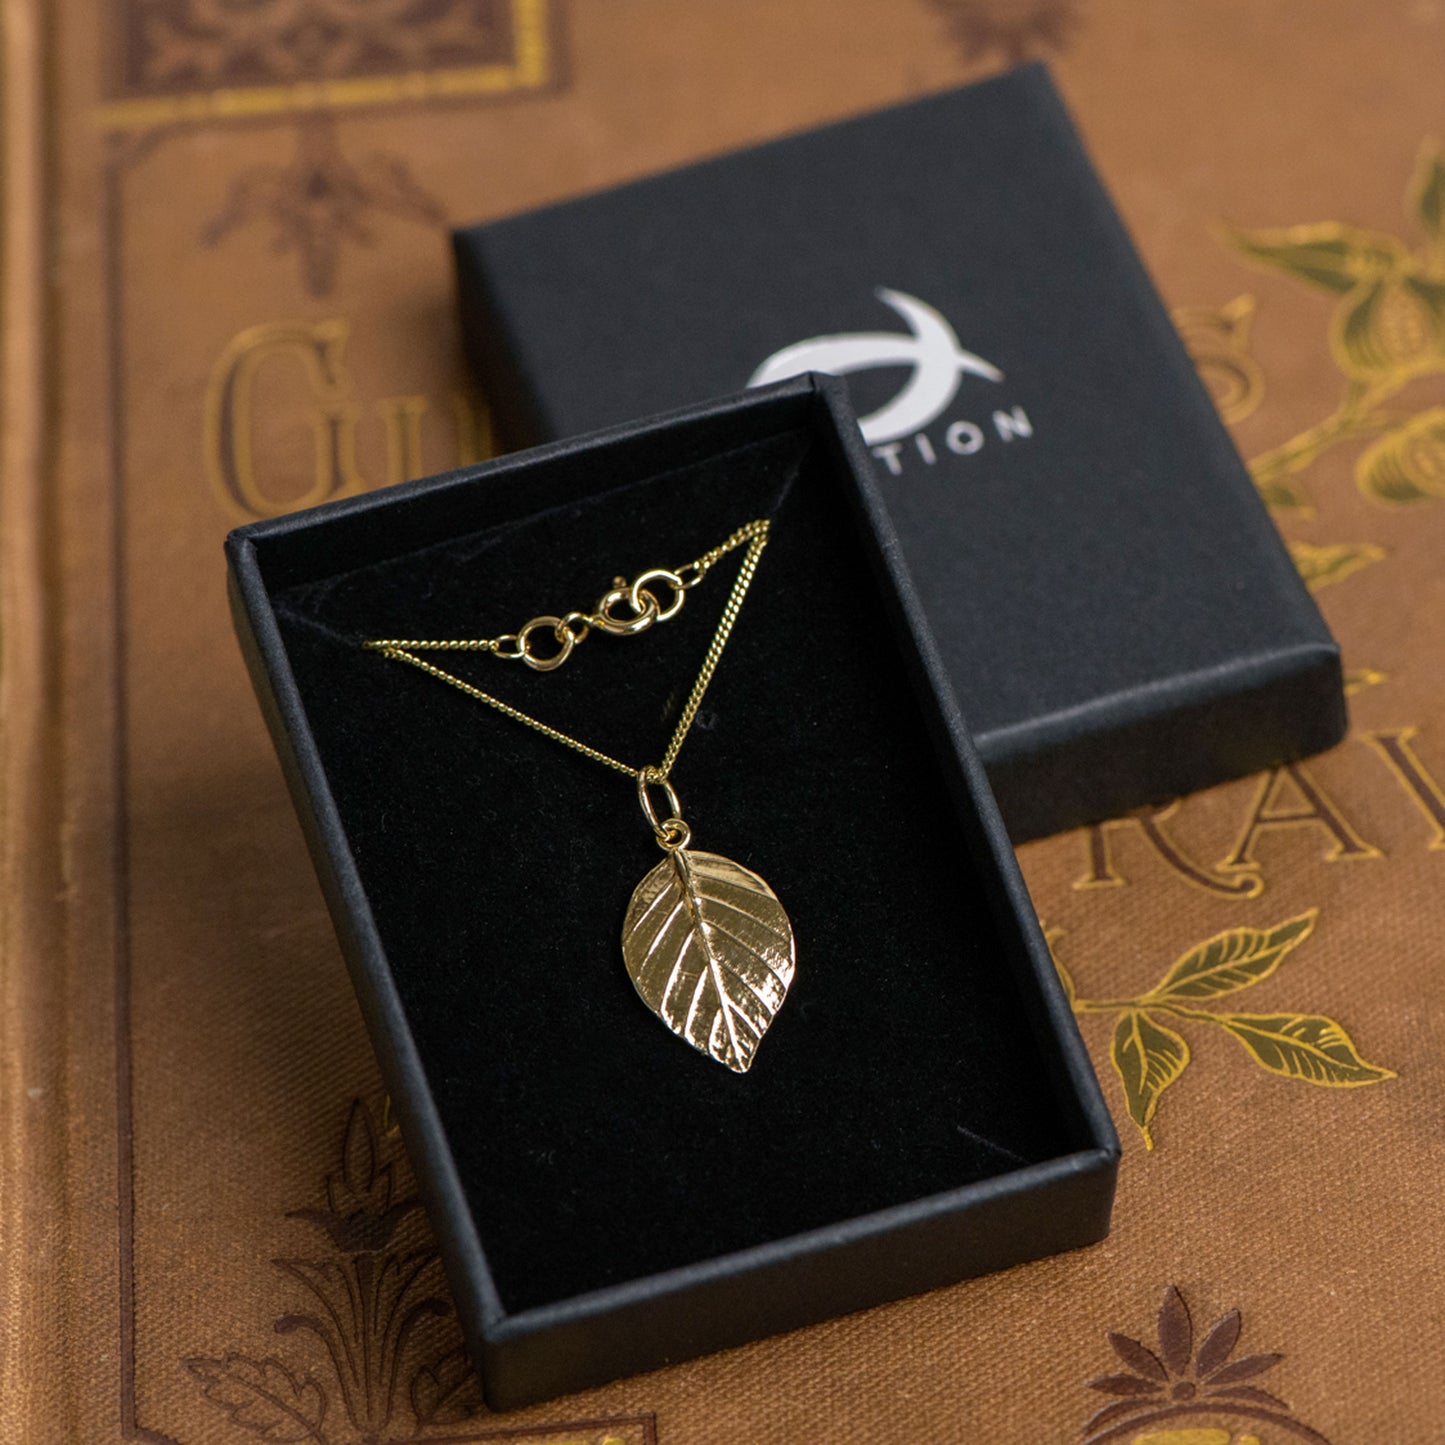 9ct gold beech leaf necklace by Notion Jewellery